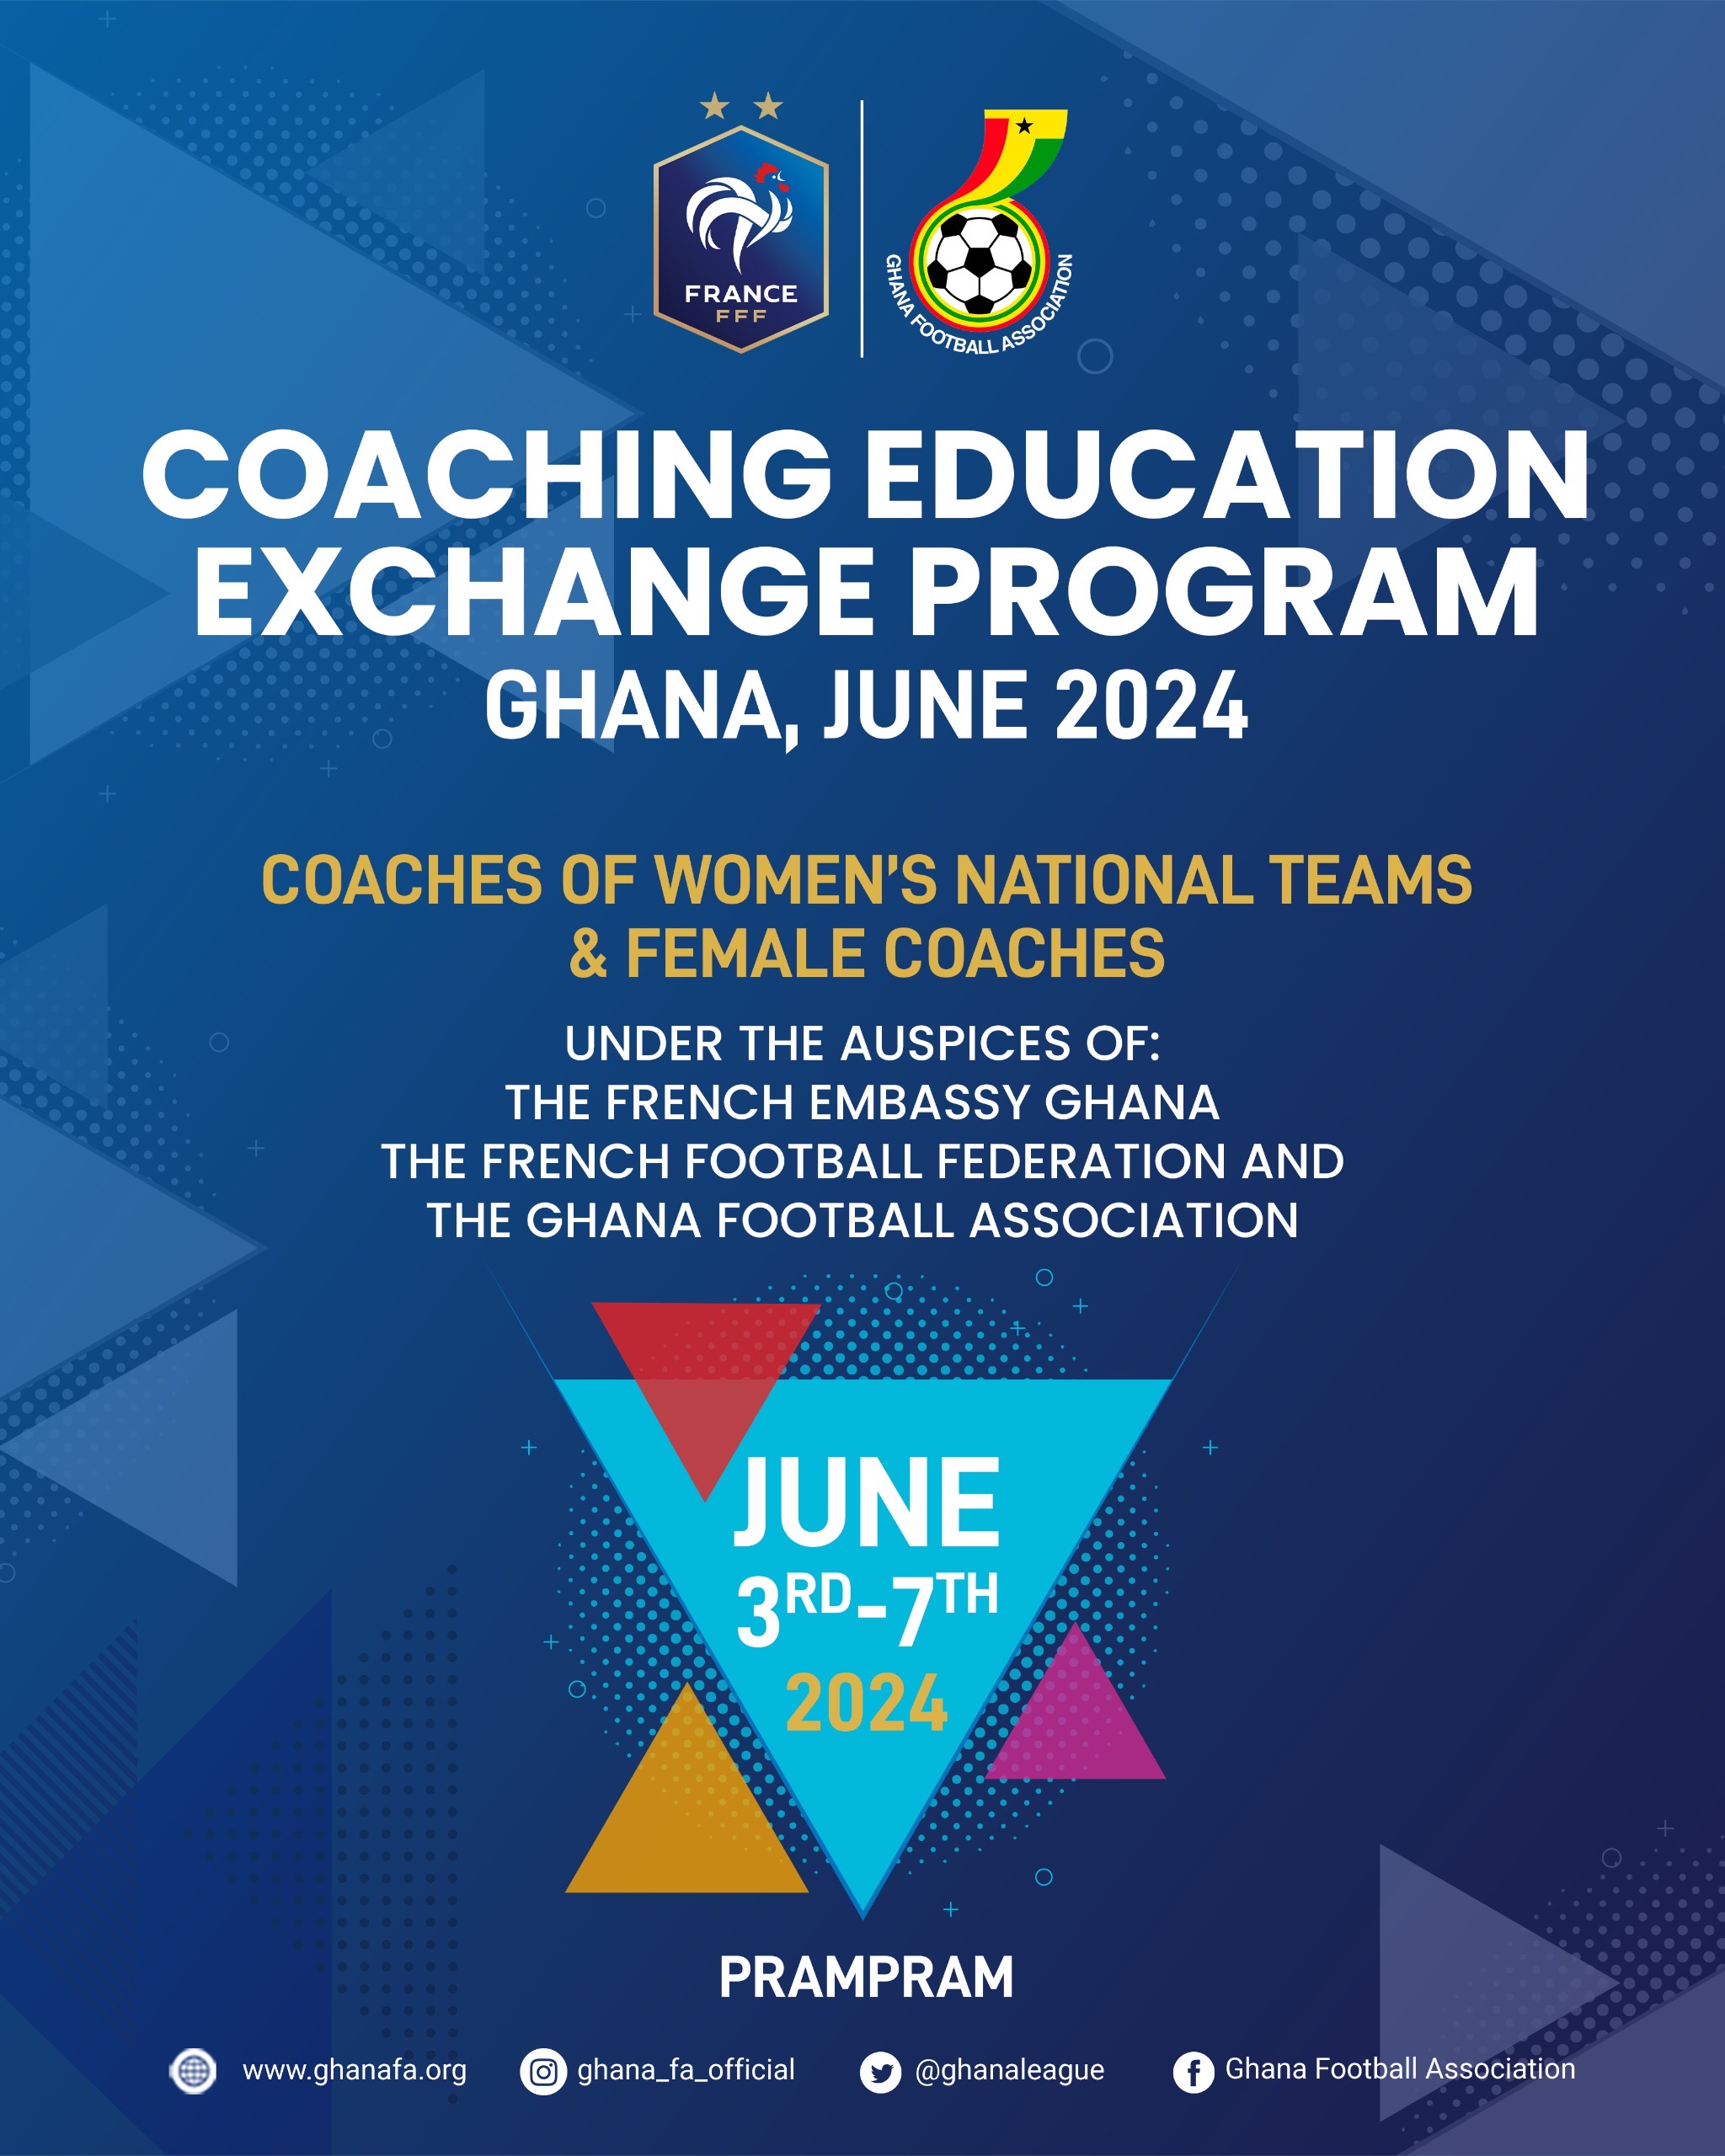 GFA-French Football Federation Coaches Education exchange program to train Women’s football coaches from June 3-7,2024